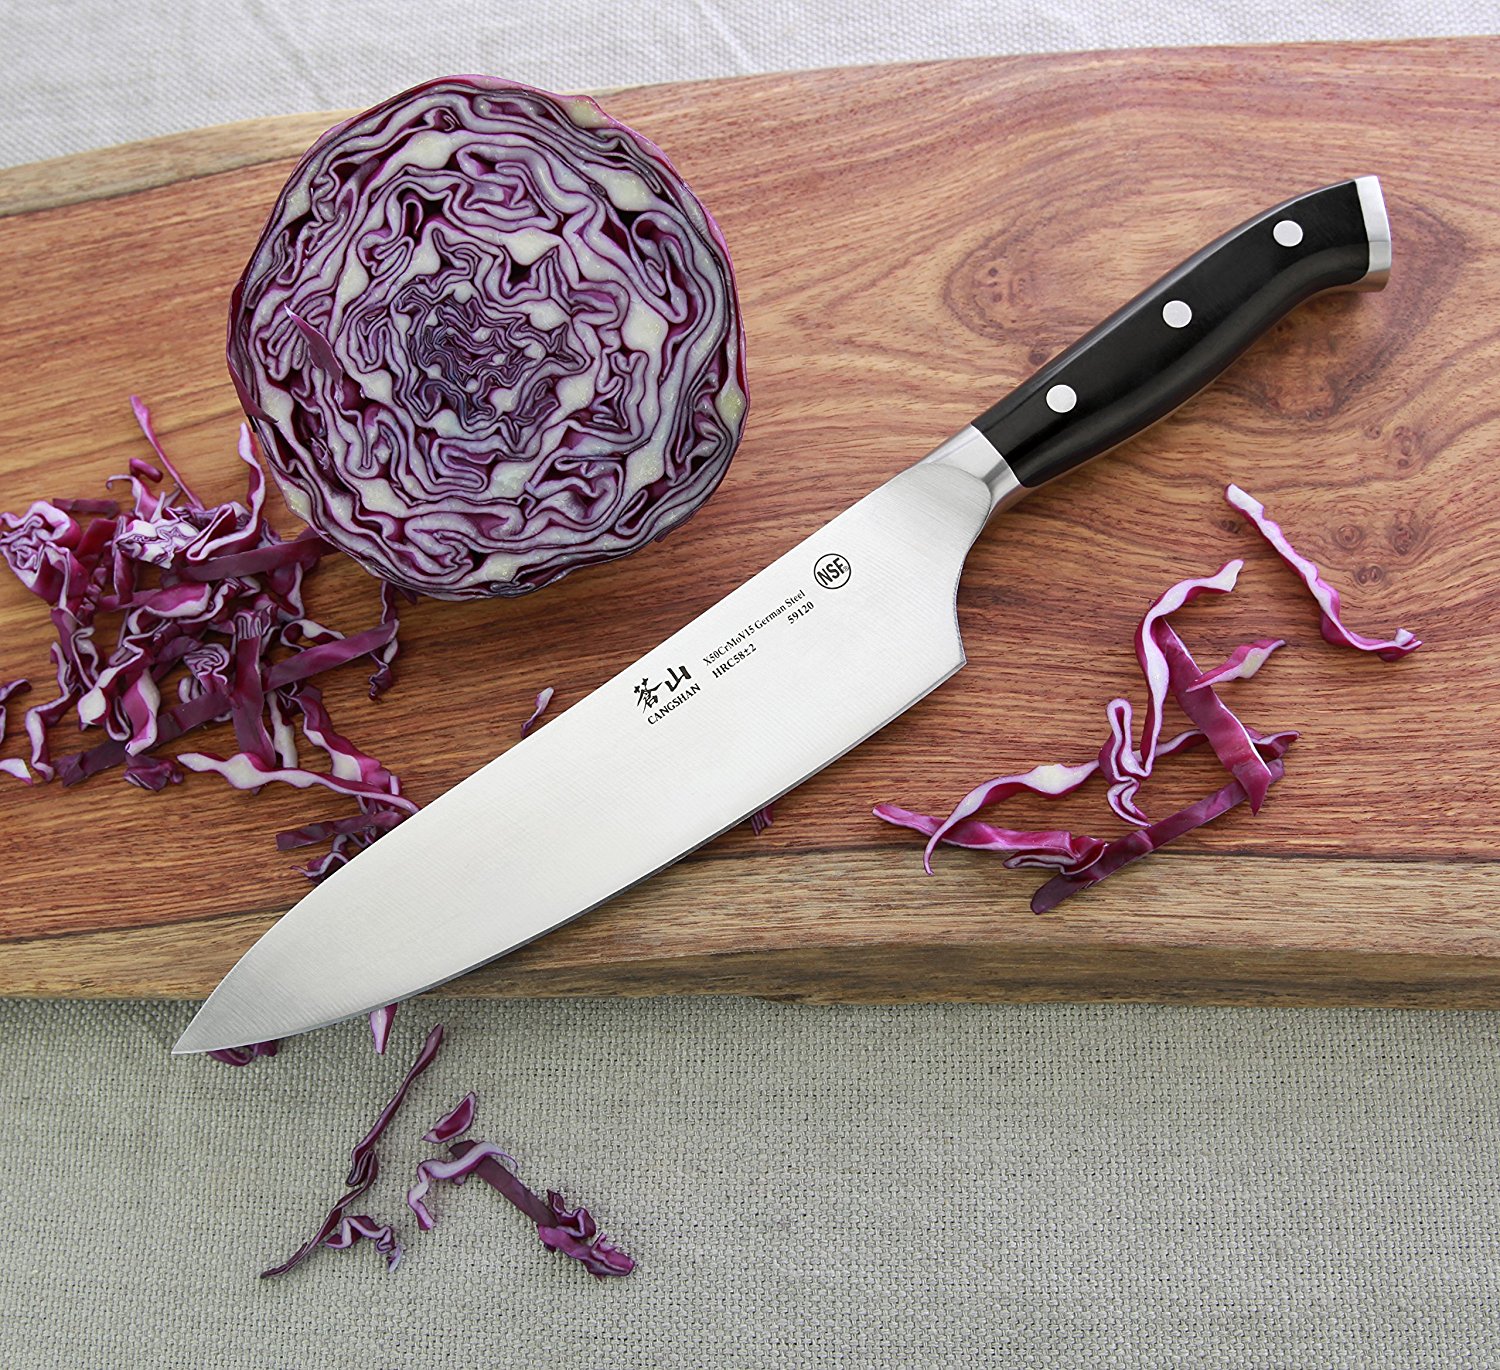 Cangshan D series German steel forged 8″ chef’s knife for $20